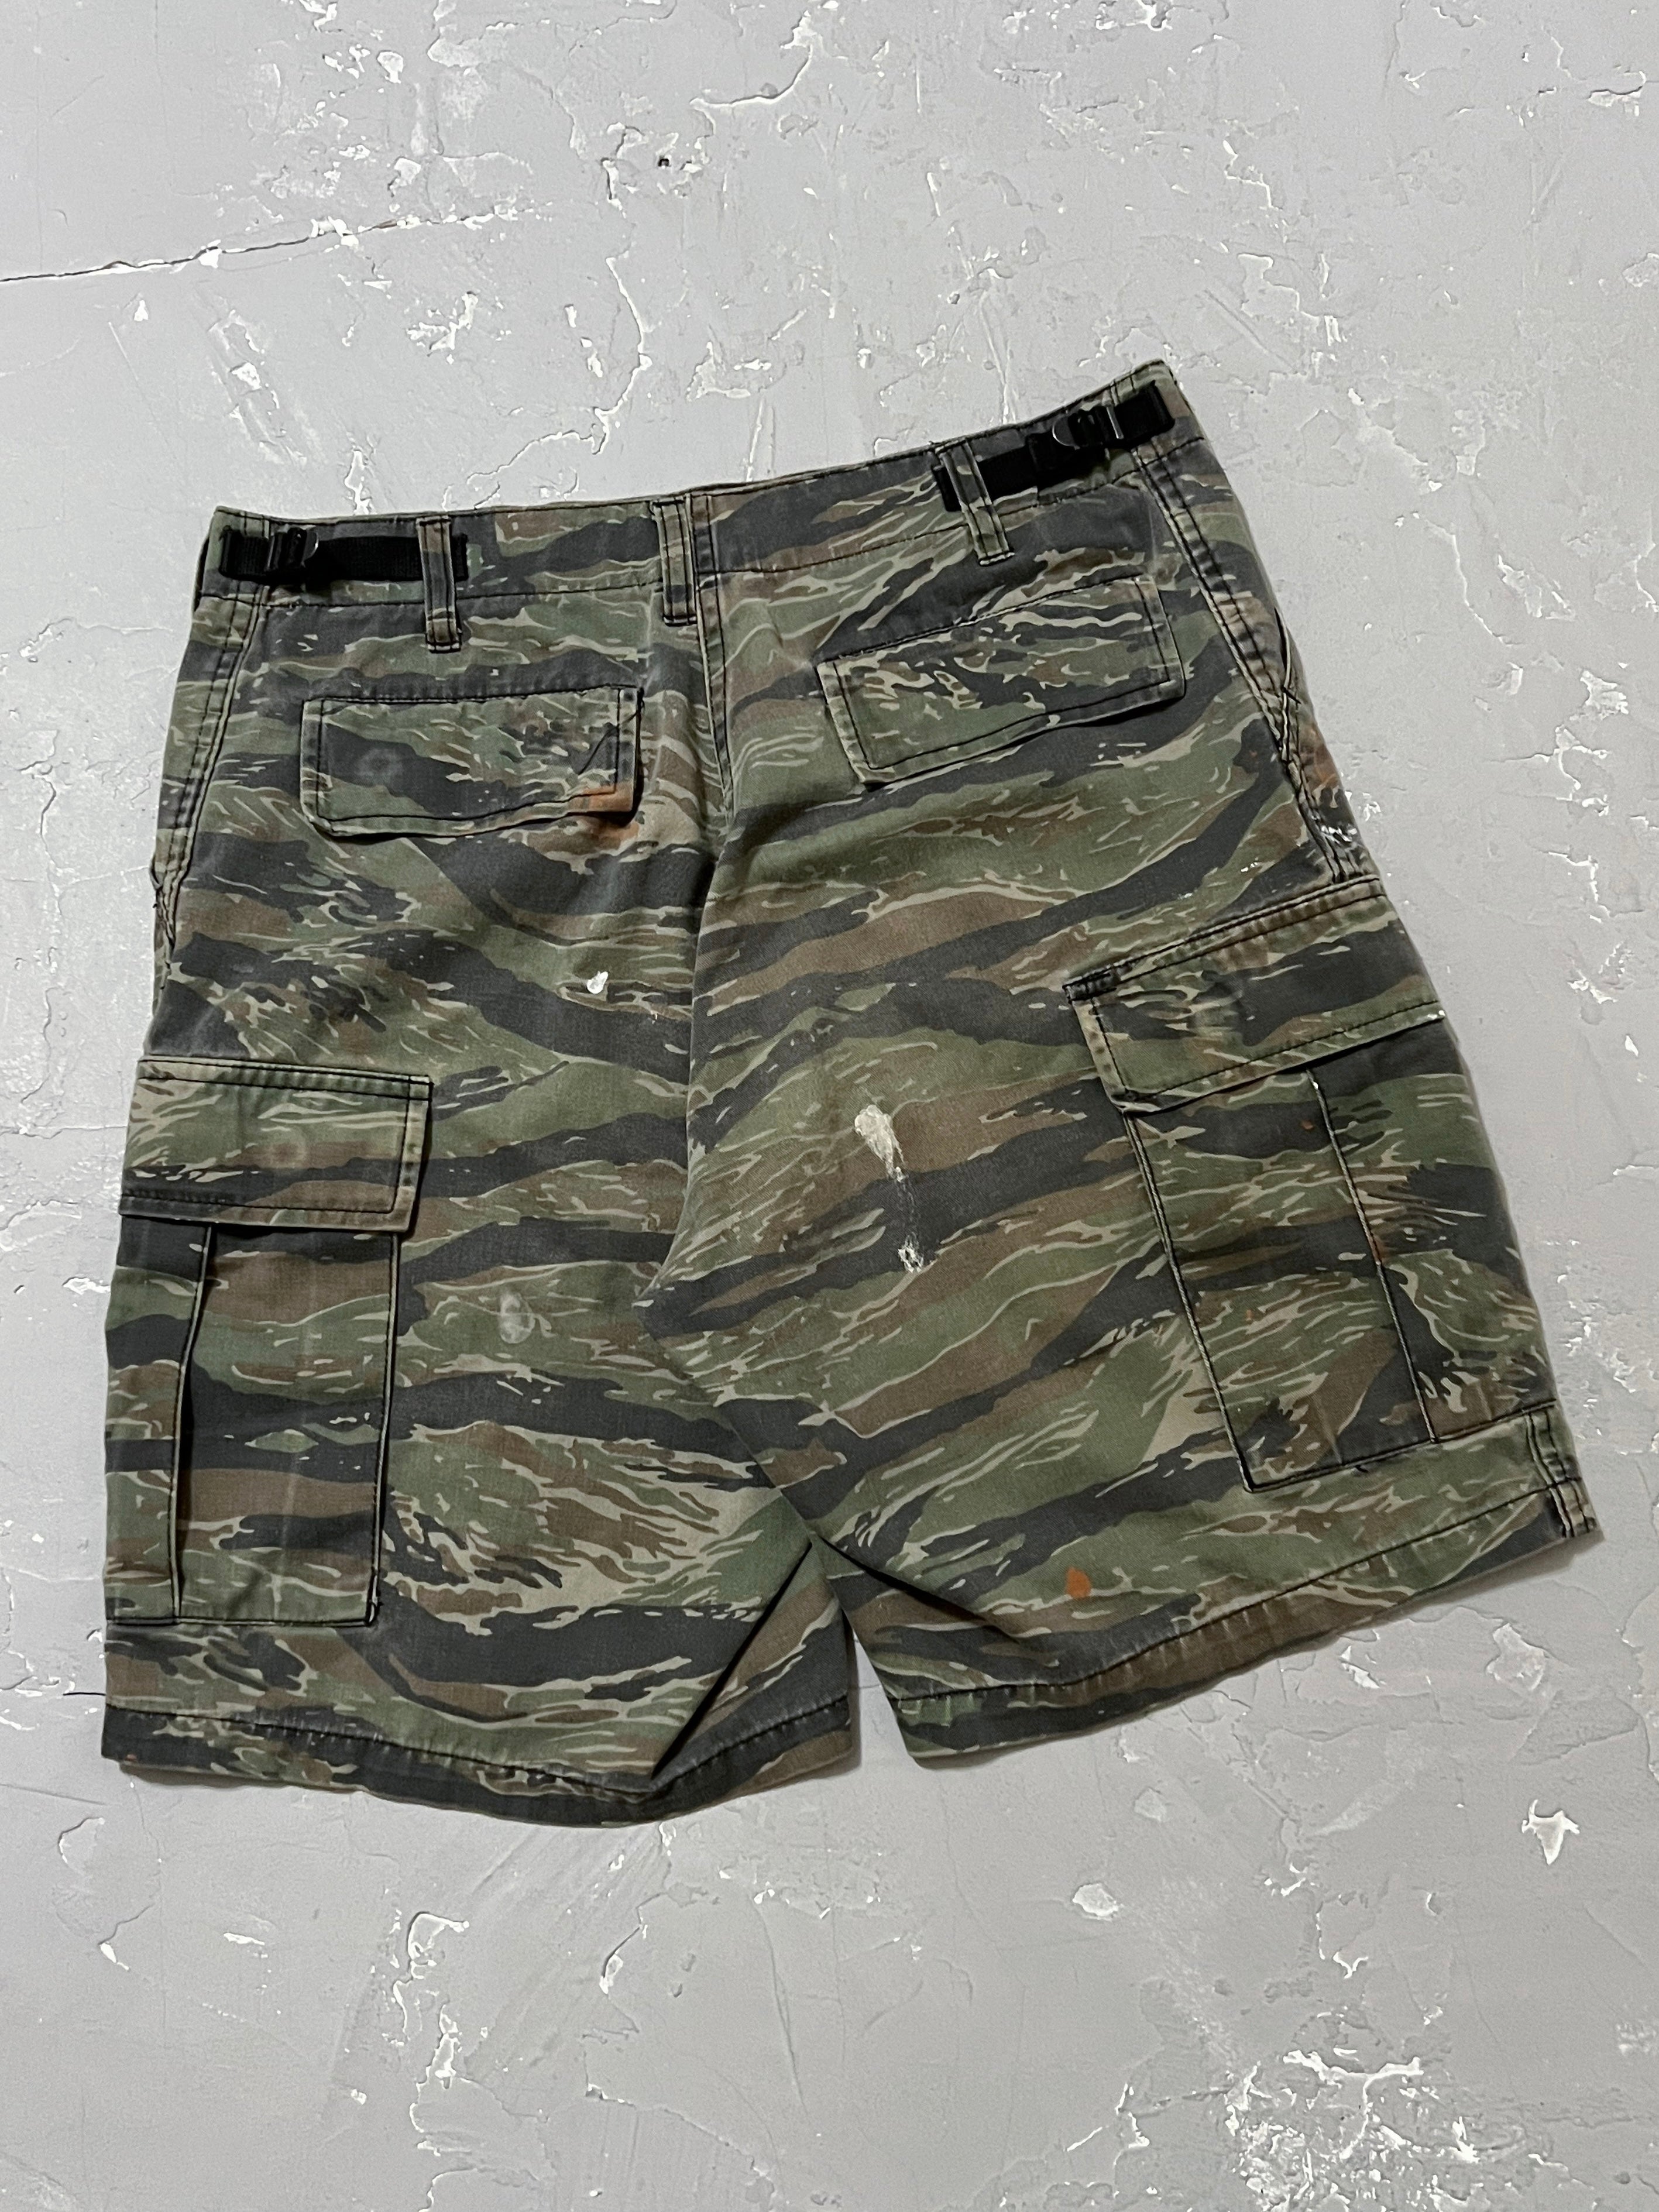 1980s Painted Tiger Camo Army Shorts [26-32]